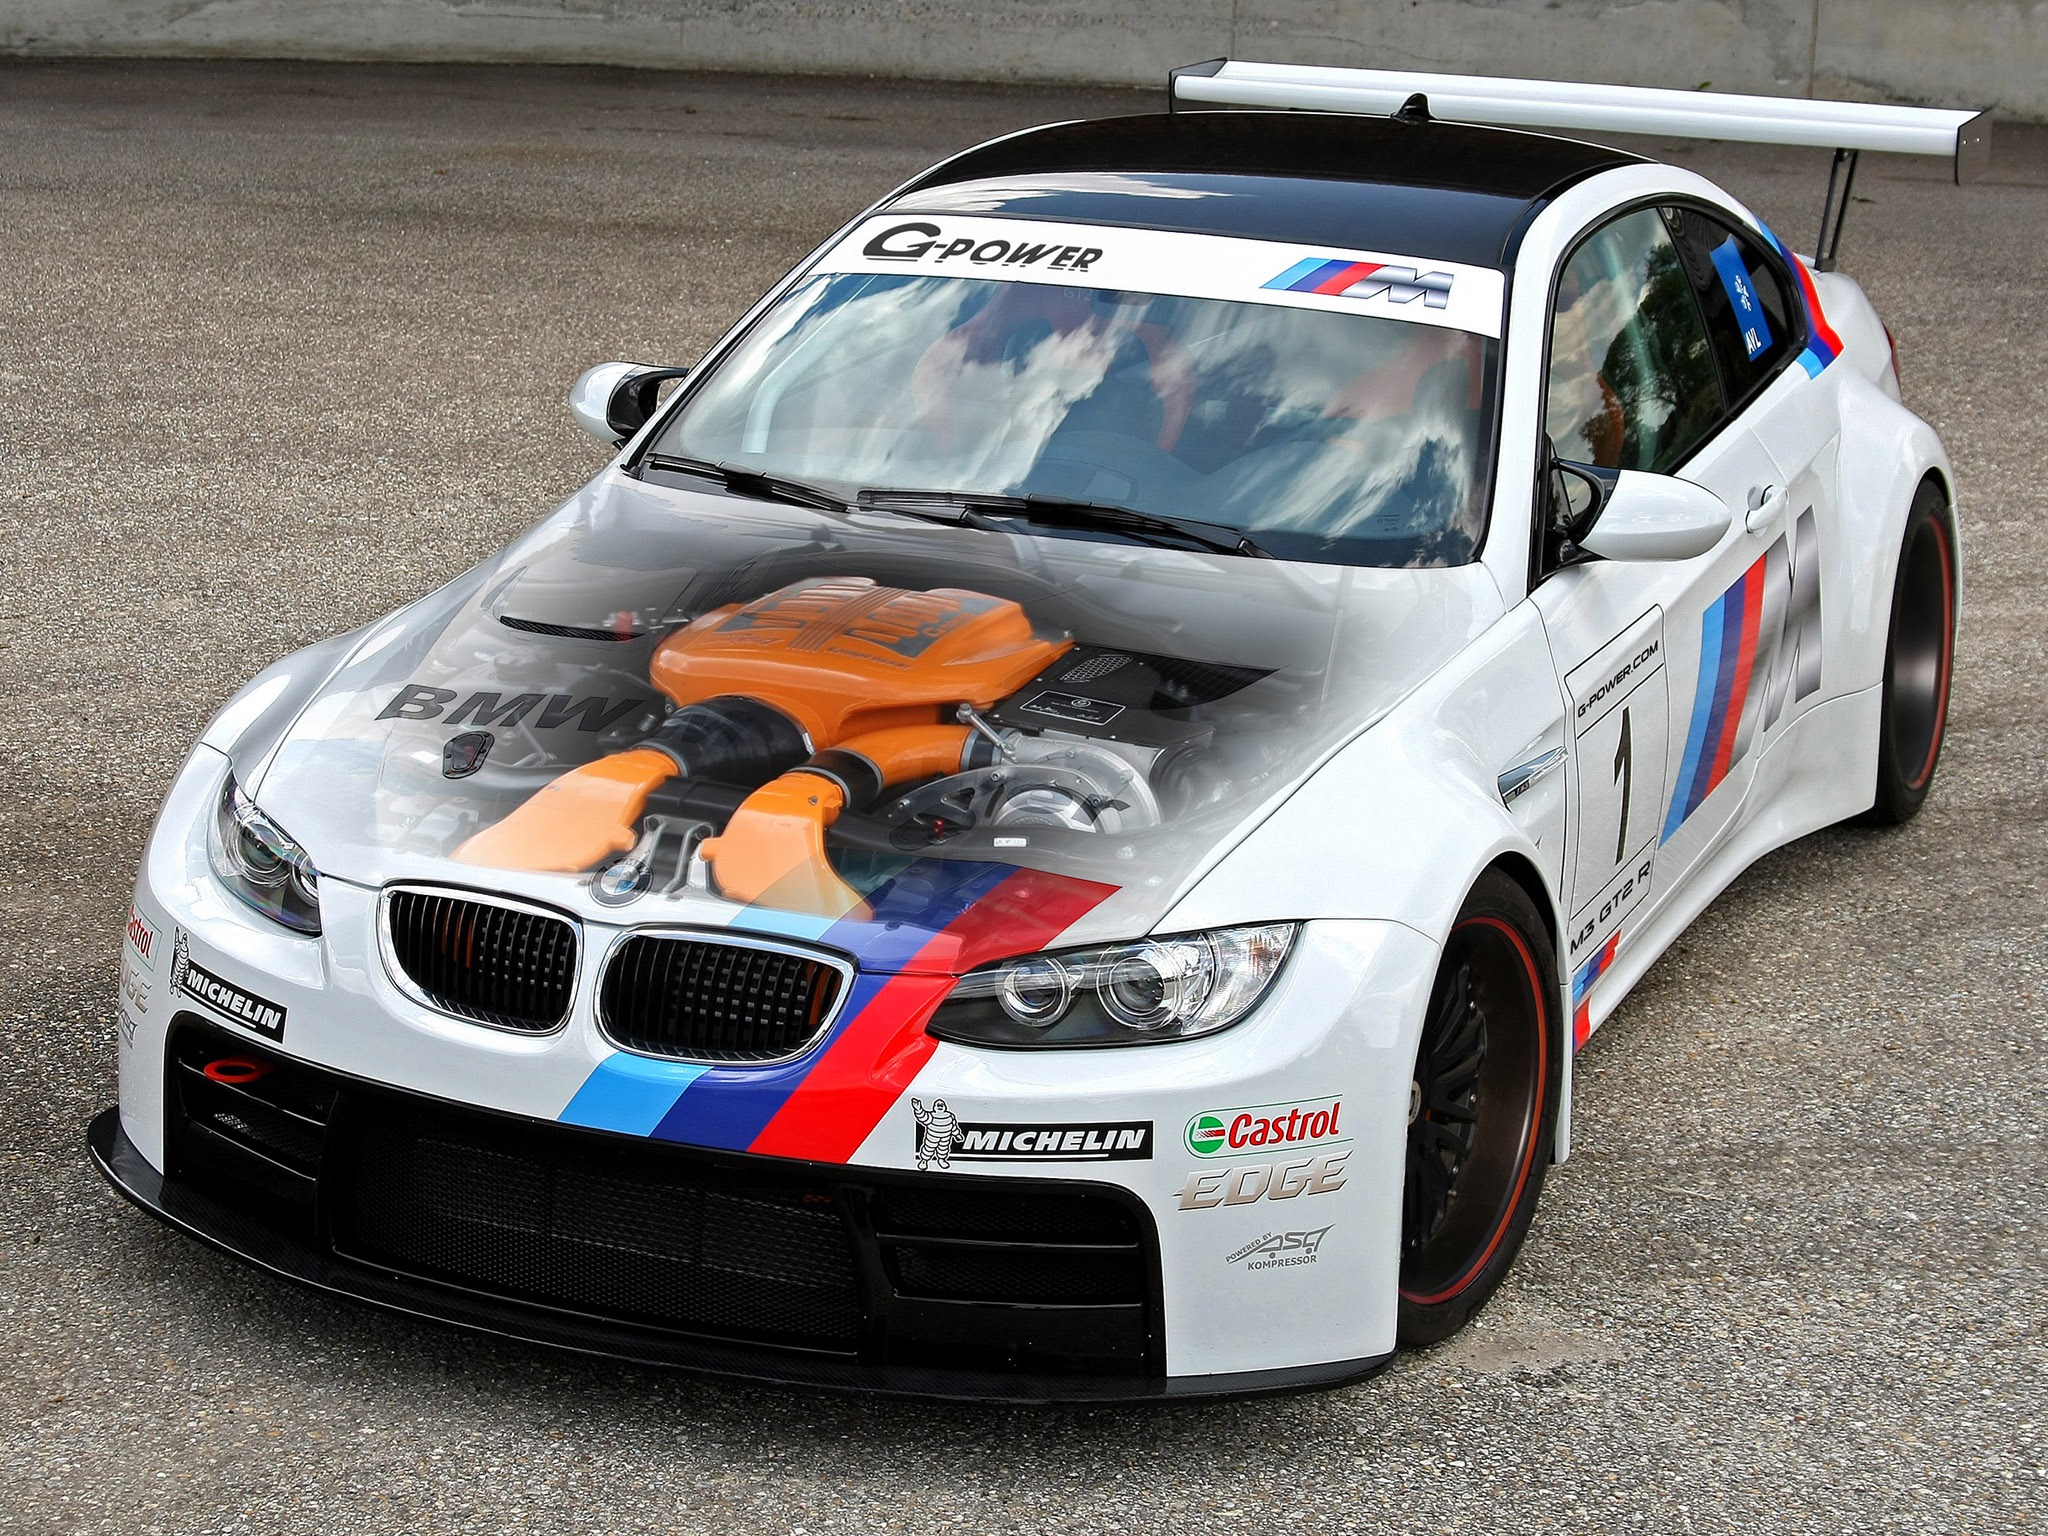 2013, G power, Bmw, M3, Gt2 r, E92, Gt2, Tuning, Race, Racing, Engine, Engines Wallpaper